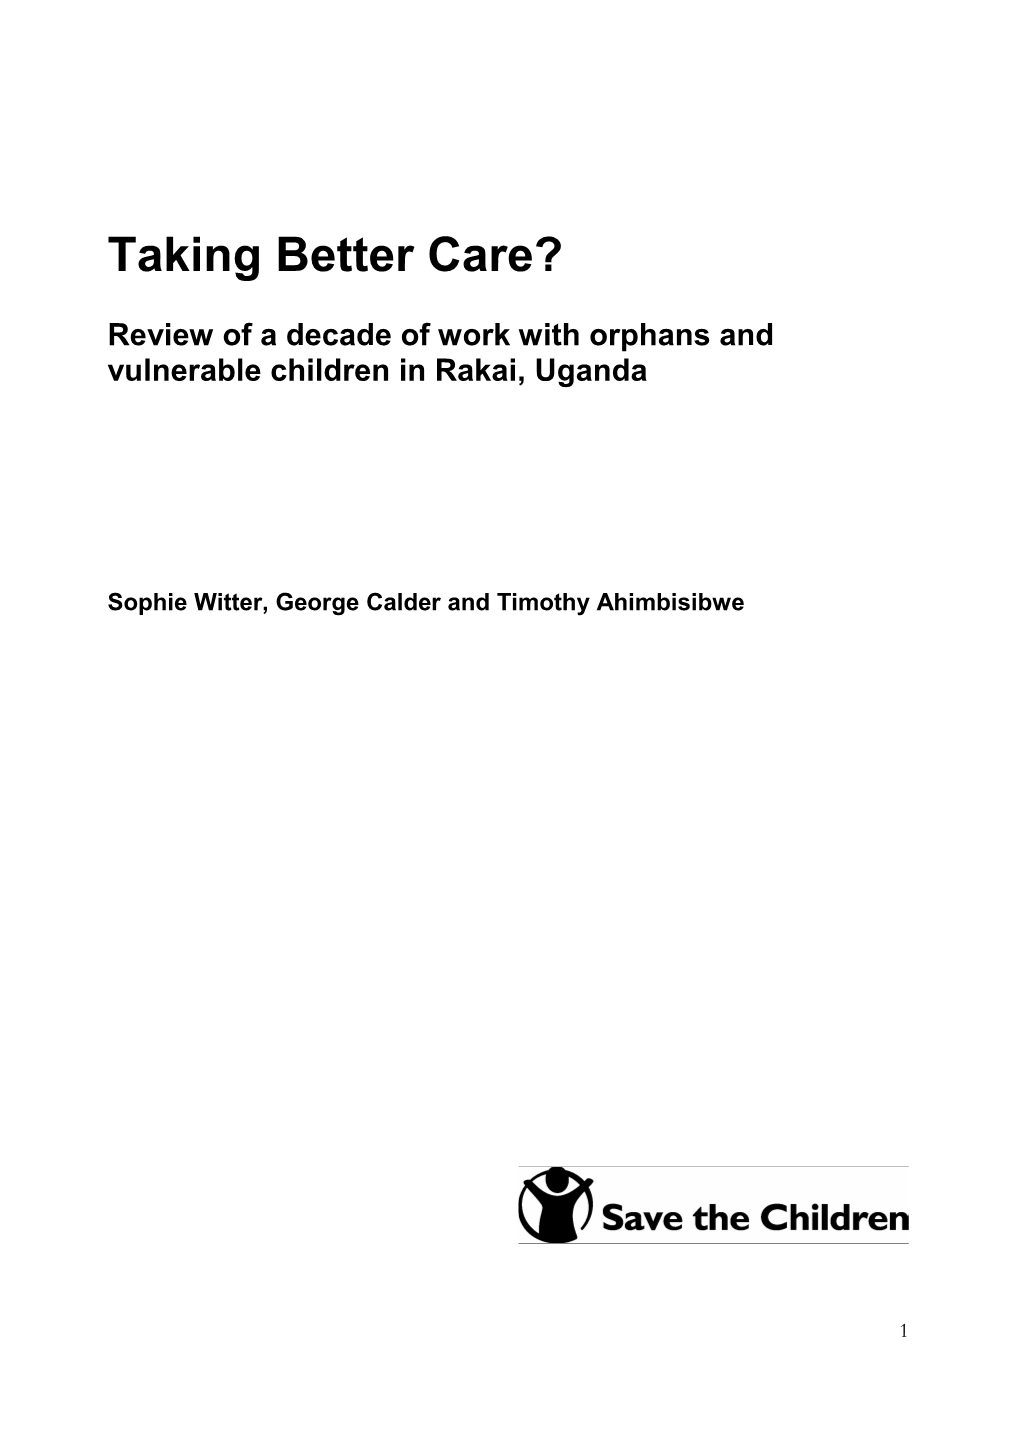 Review of a Decade of Work with Orphans and Vulnerable Children in Rakai, Uganda